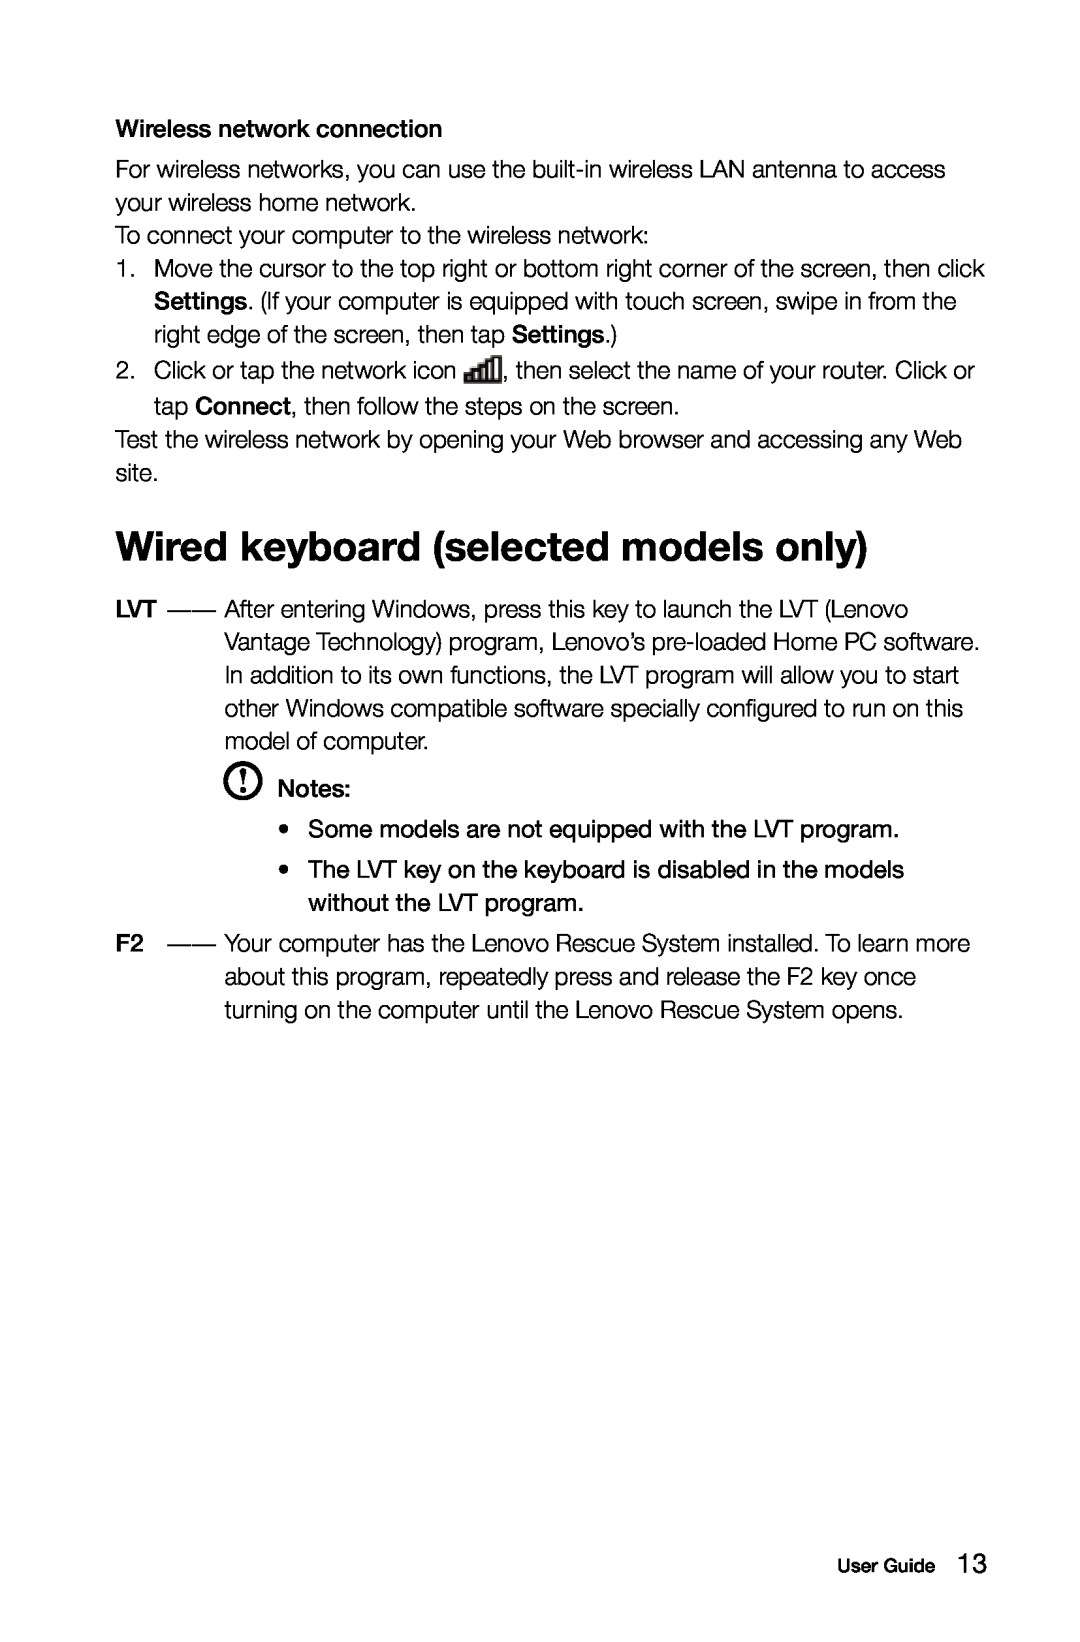 Lenovo 10089/1168/4744 [K410], 10121/90A1 [K450 ES], 10120/90A0 [K450 NON-ES] manual Wired keyboard selected models only 